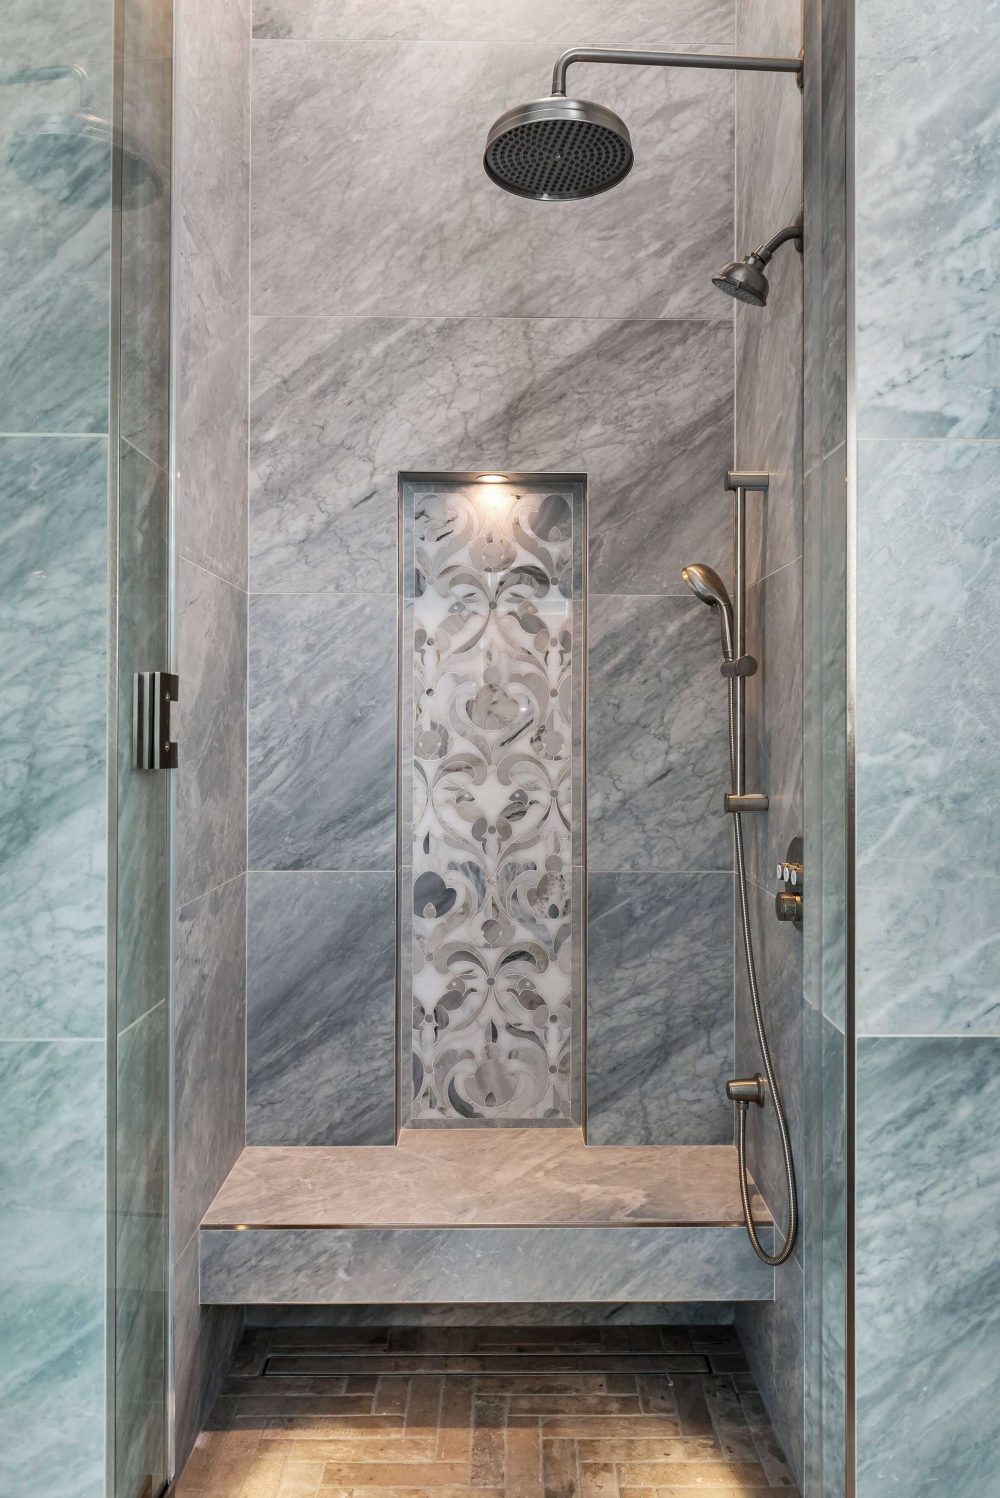 View of walk-in shower stall. Four different stone materials. Built-in bench with white and grey floral inlay design